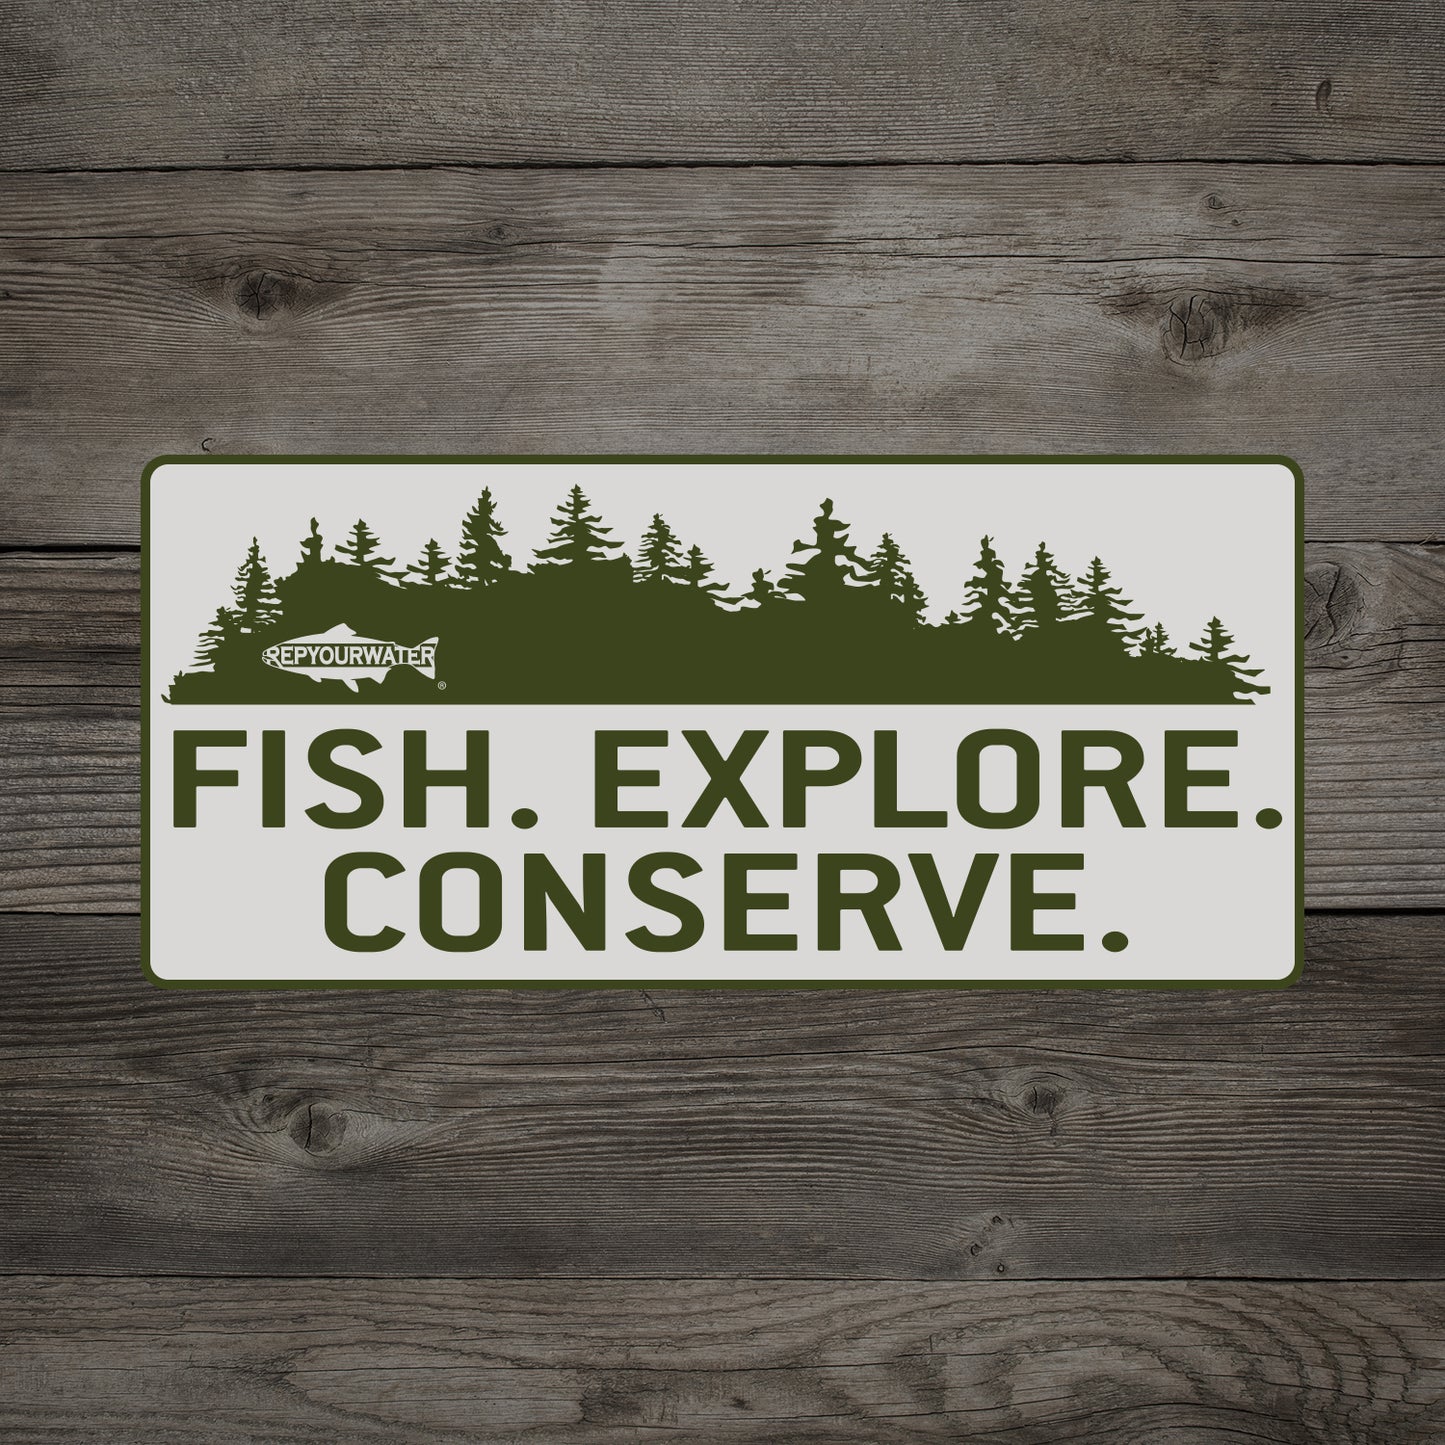 A wooden background has a mockup of a sticker on it which has pine trees above the words fish explore conserve. In the pine trees is a logo that reads repyourwater inside a trout silhouette